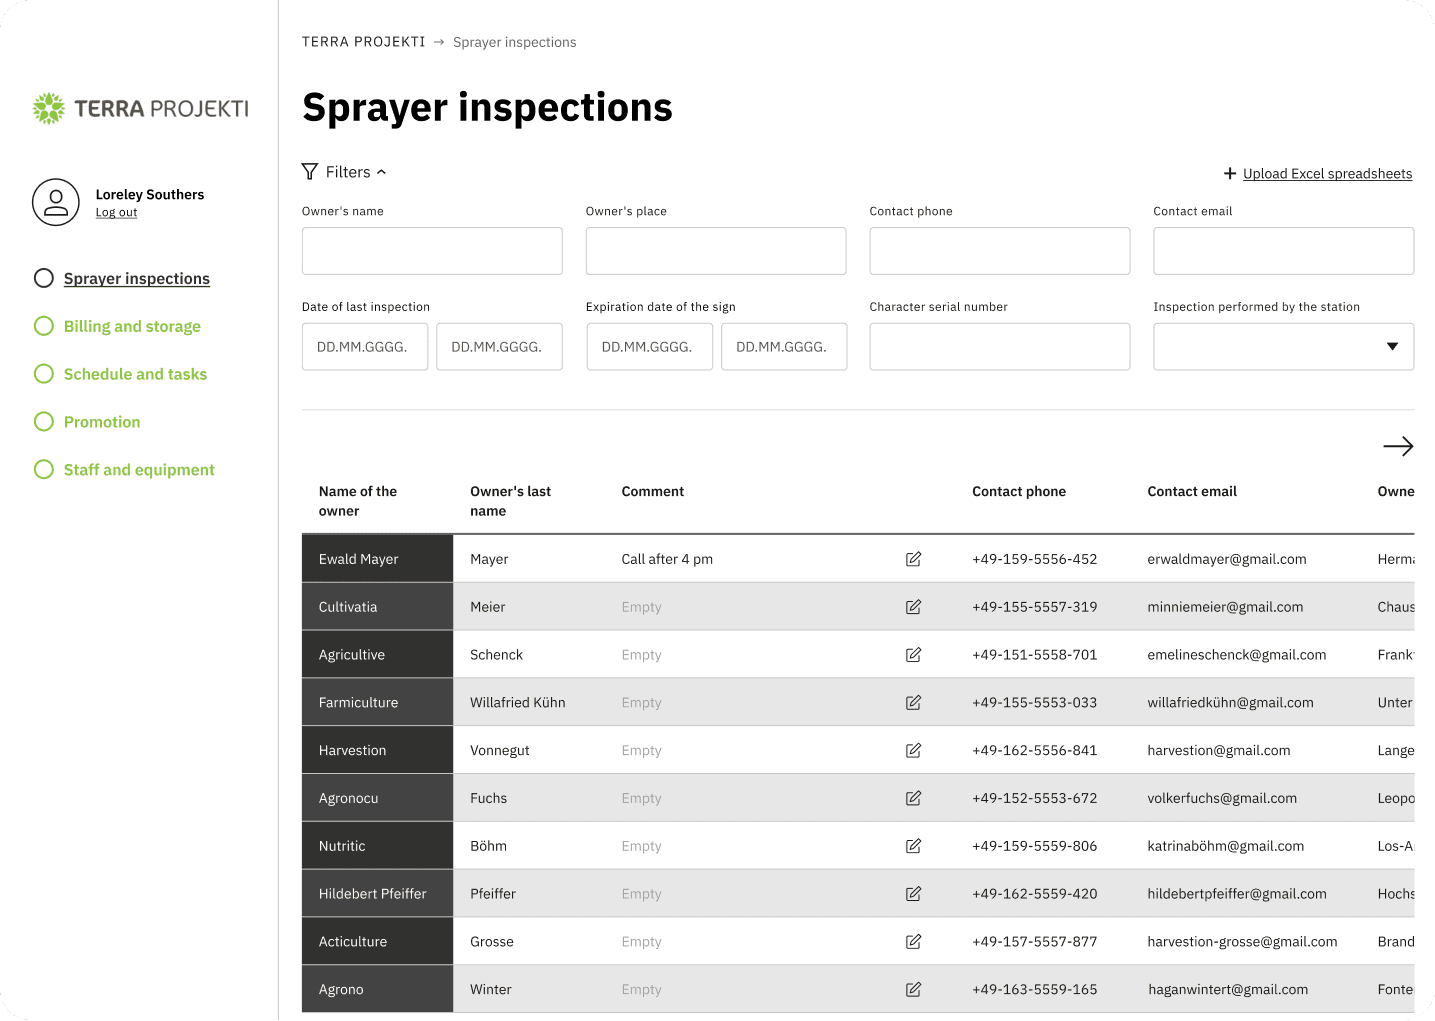 Sprayer inspection overview